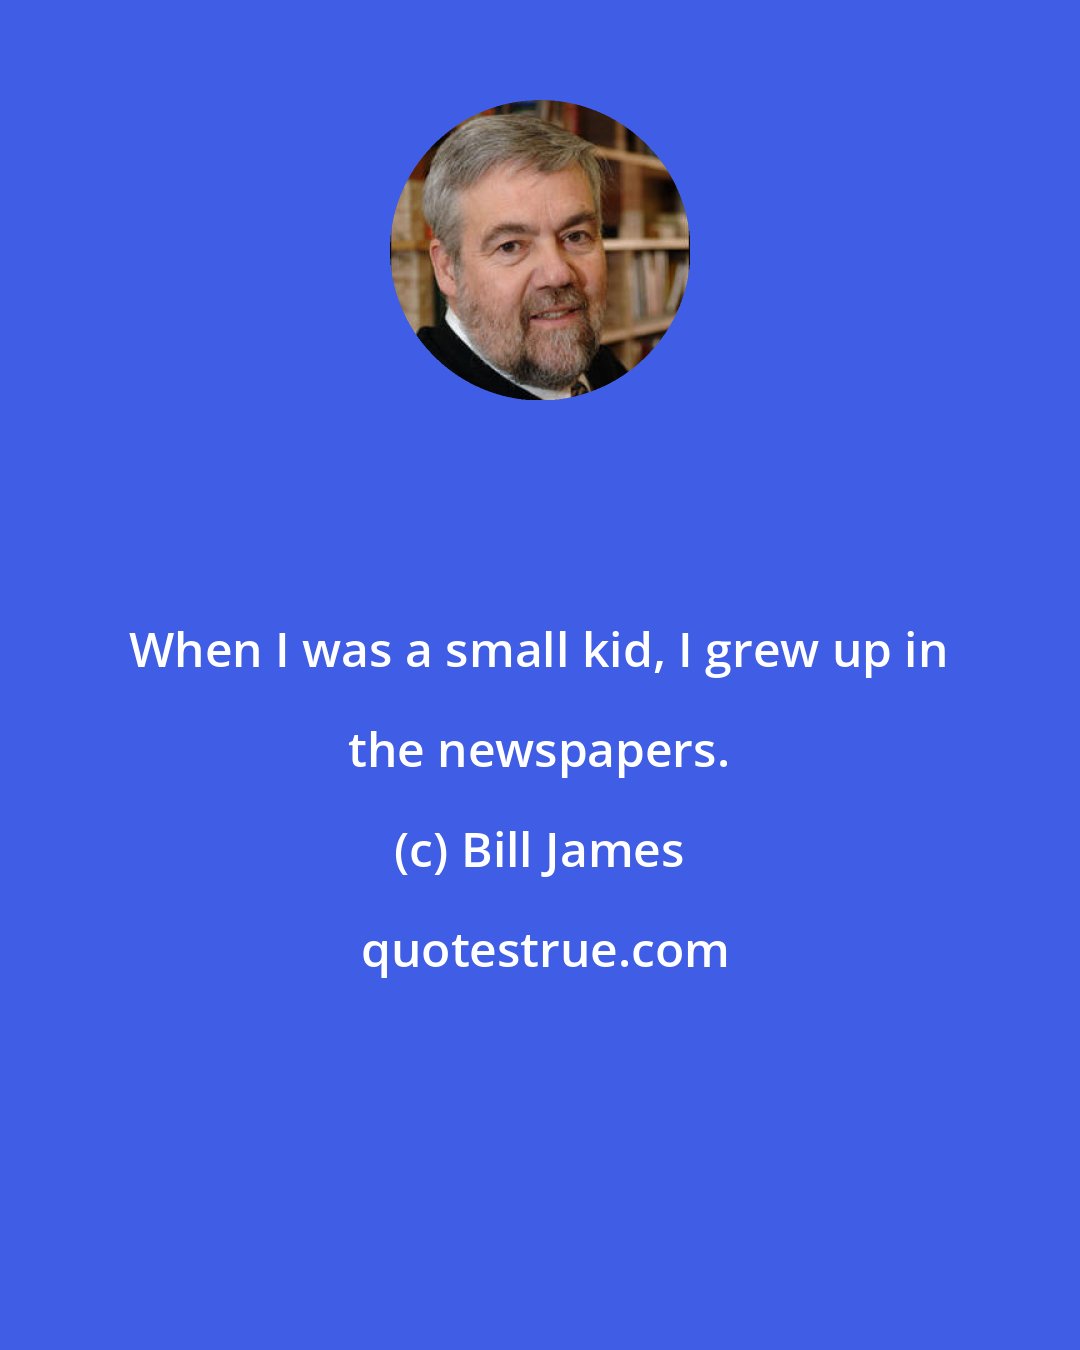 Bill James: When I was a small kid, I grew up in the newspapers.